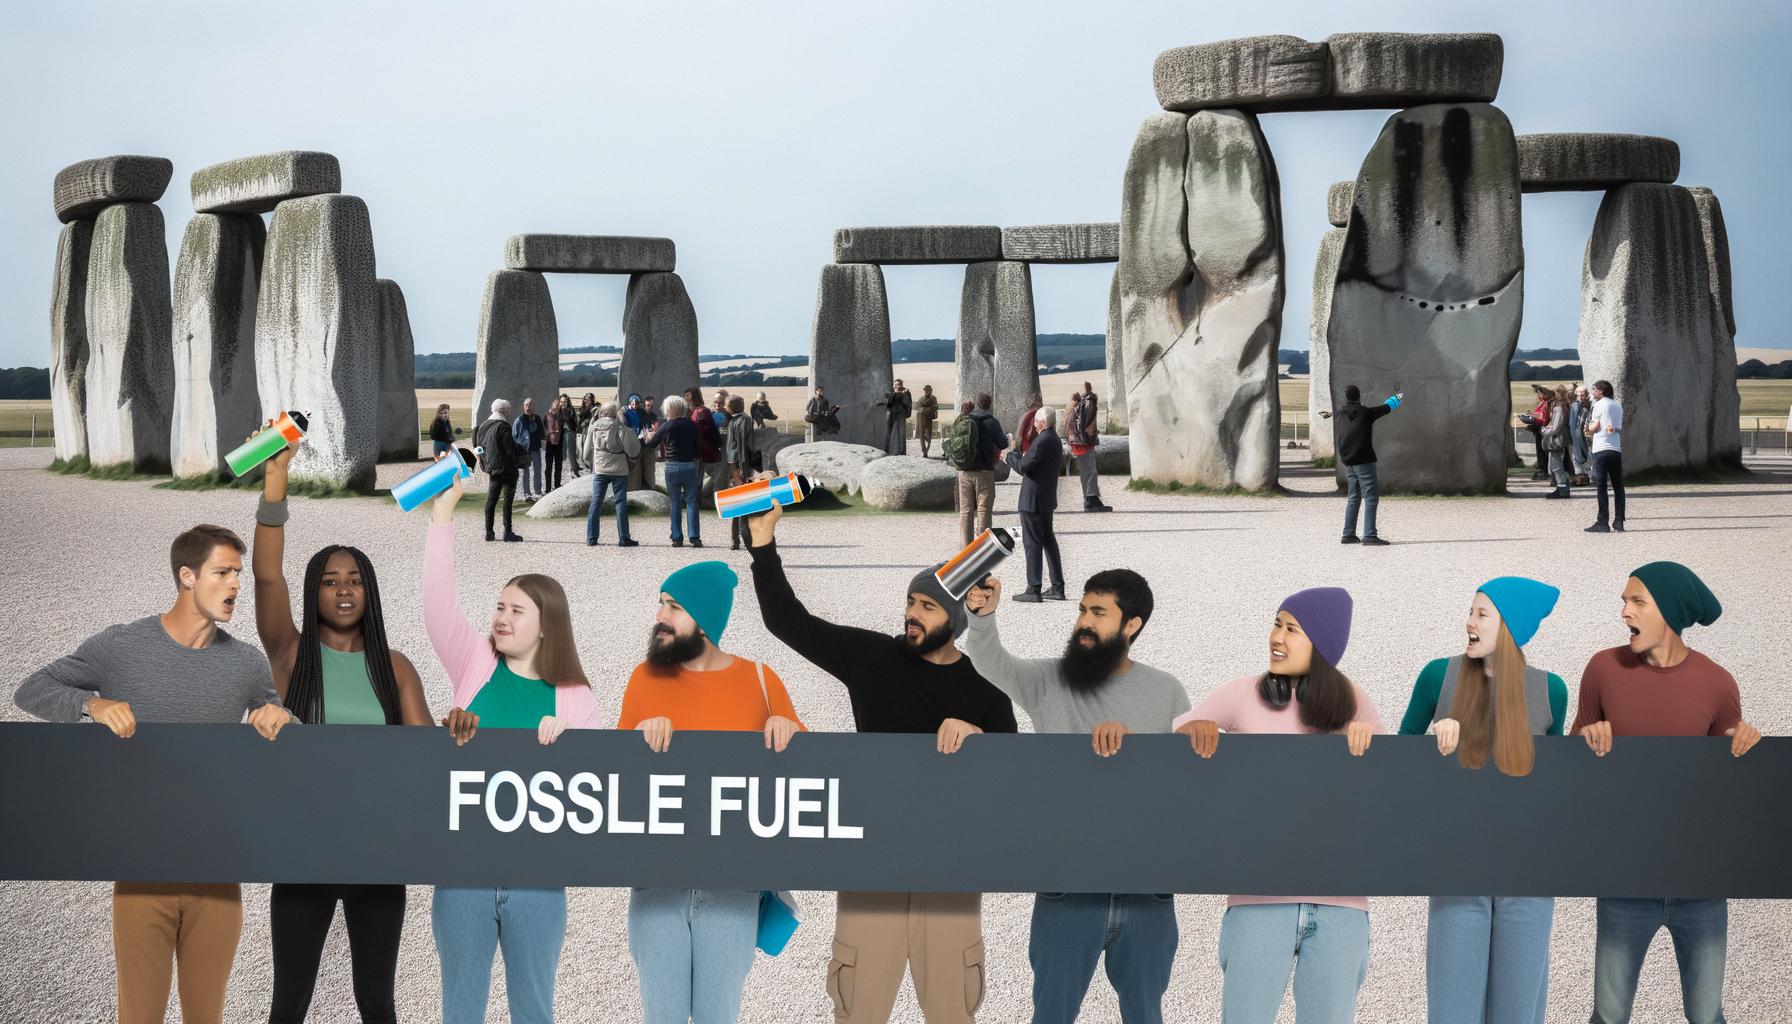 Protesters spray Stonehenge to demand fossil fuel phase-out Balanced News